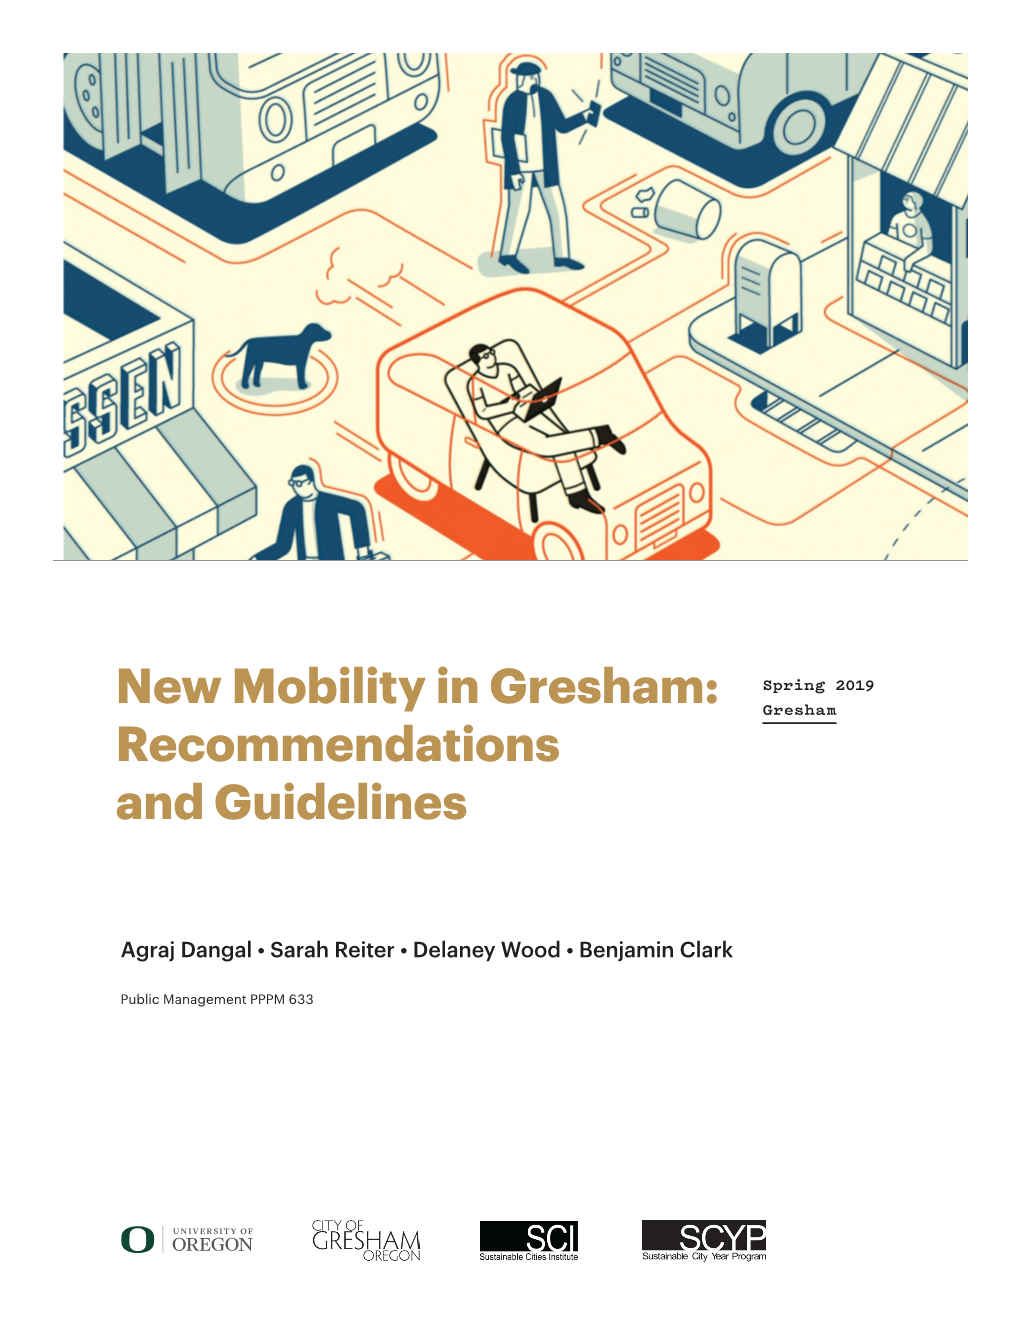 New Mobility in Gresham: Gresham Recommendations and Guidelines